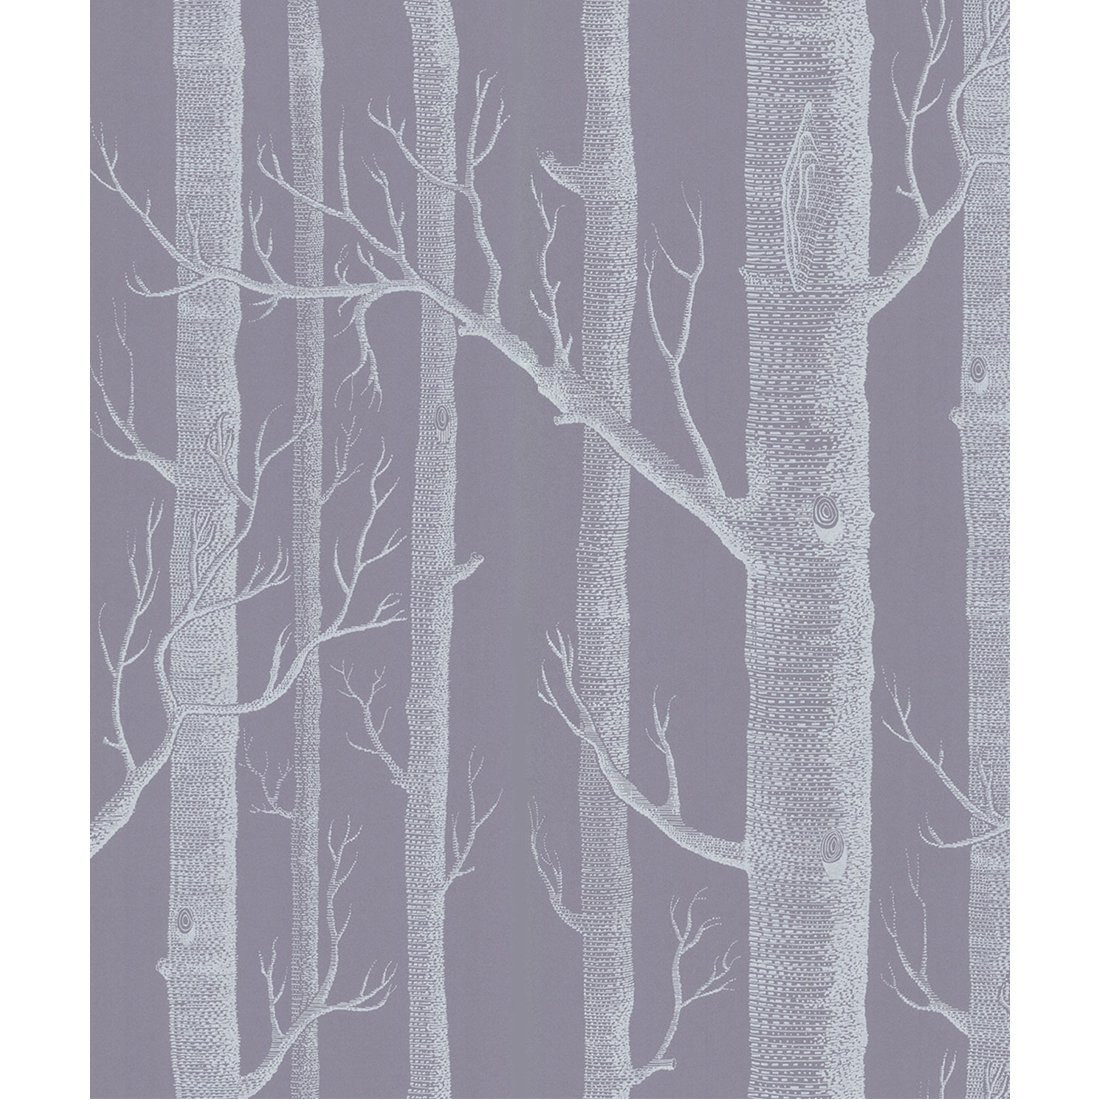 Cole & Son Woods Behang - 6912151